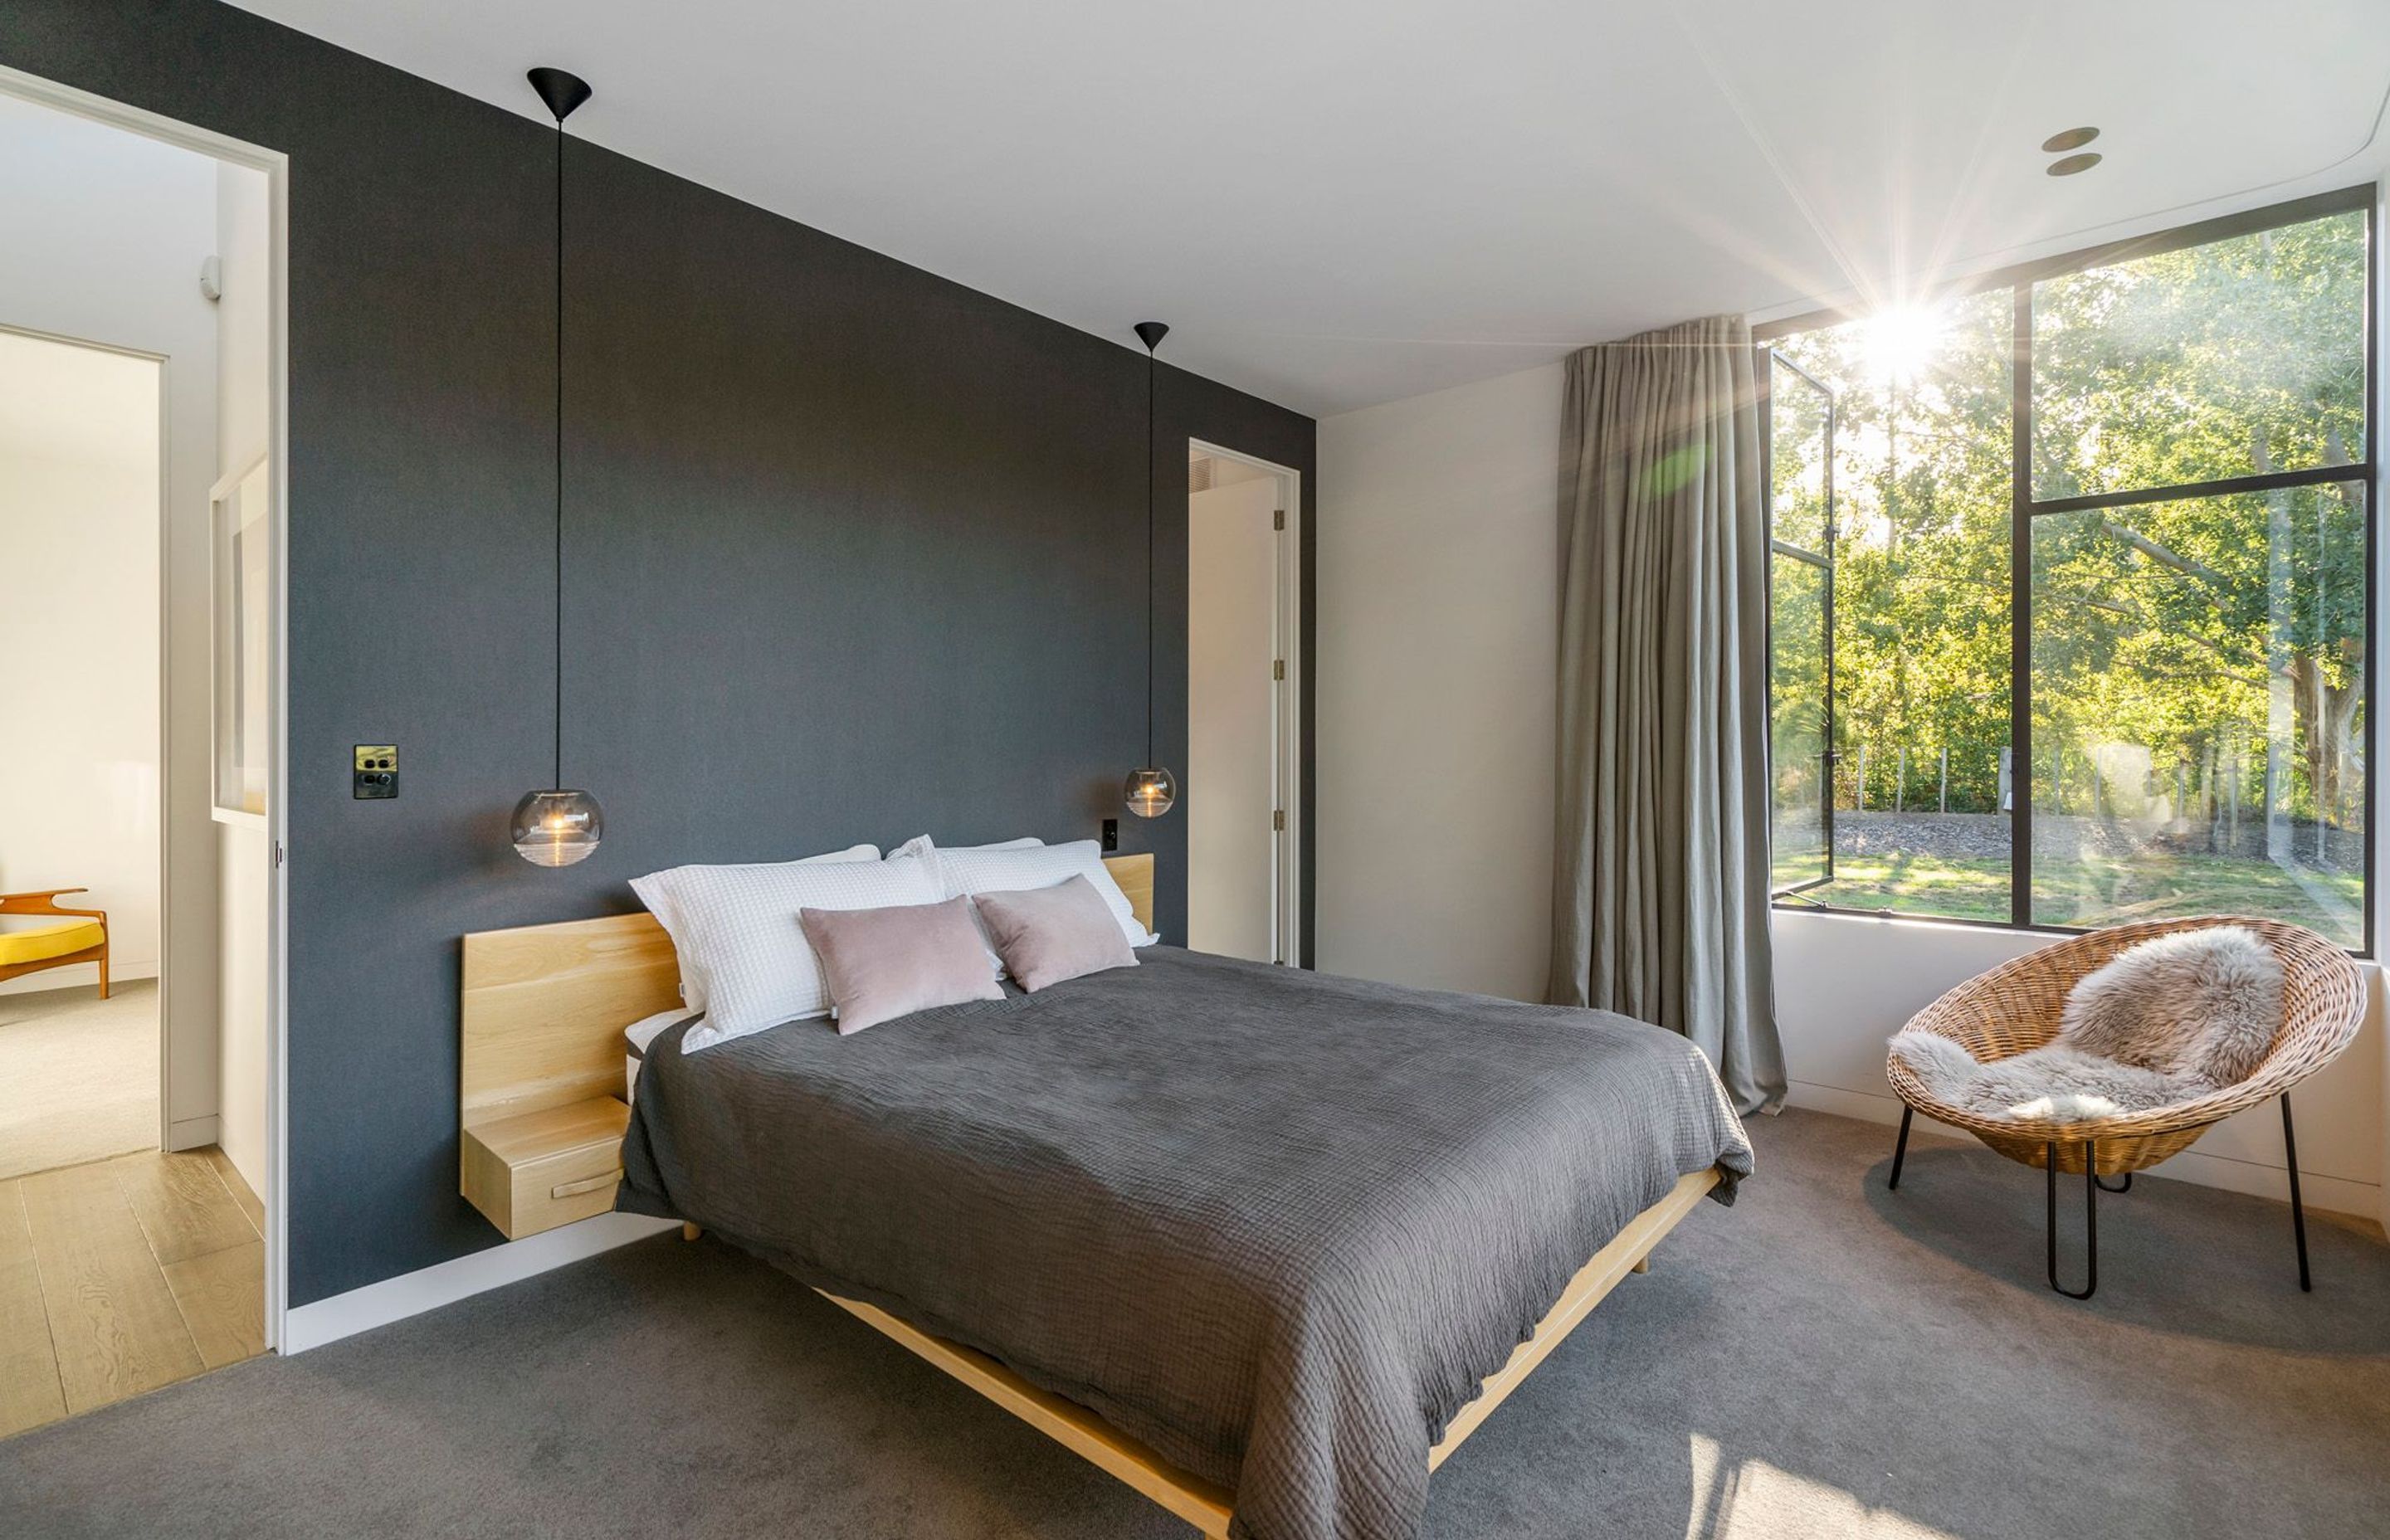 Grey on grey, the neutral palette of the master bedroom is an effective counterpoint to all the timber throughout the house and the surrounding green landscape.